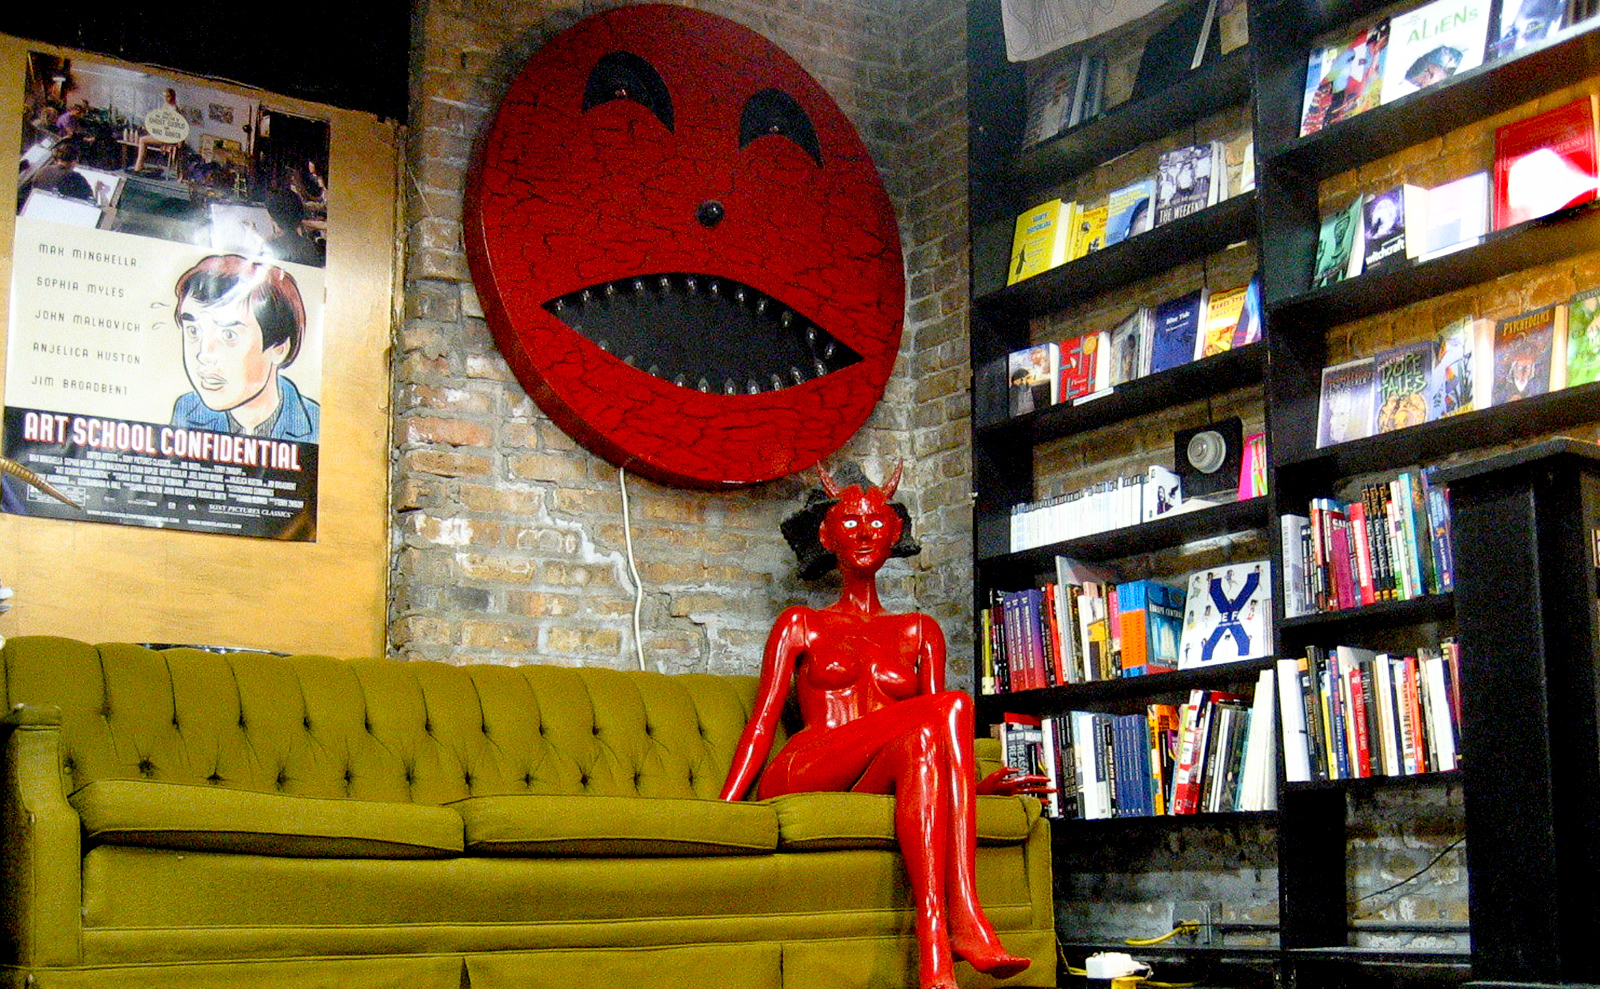 stage area in quimby's with green couch and red lady-devil mannequin